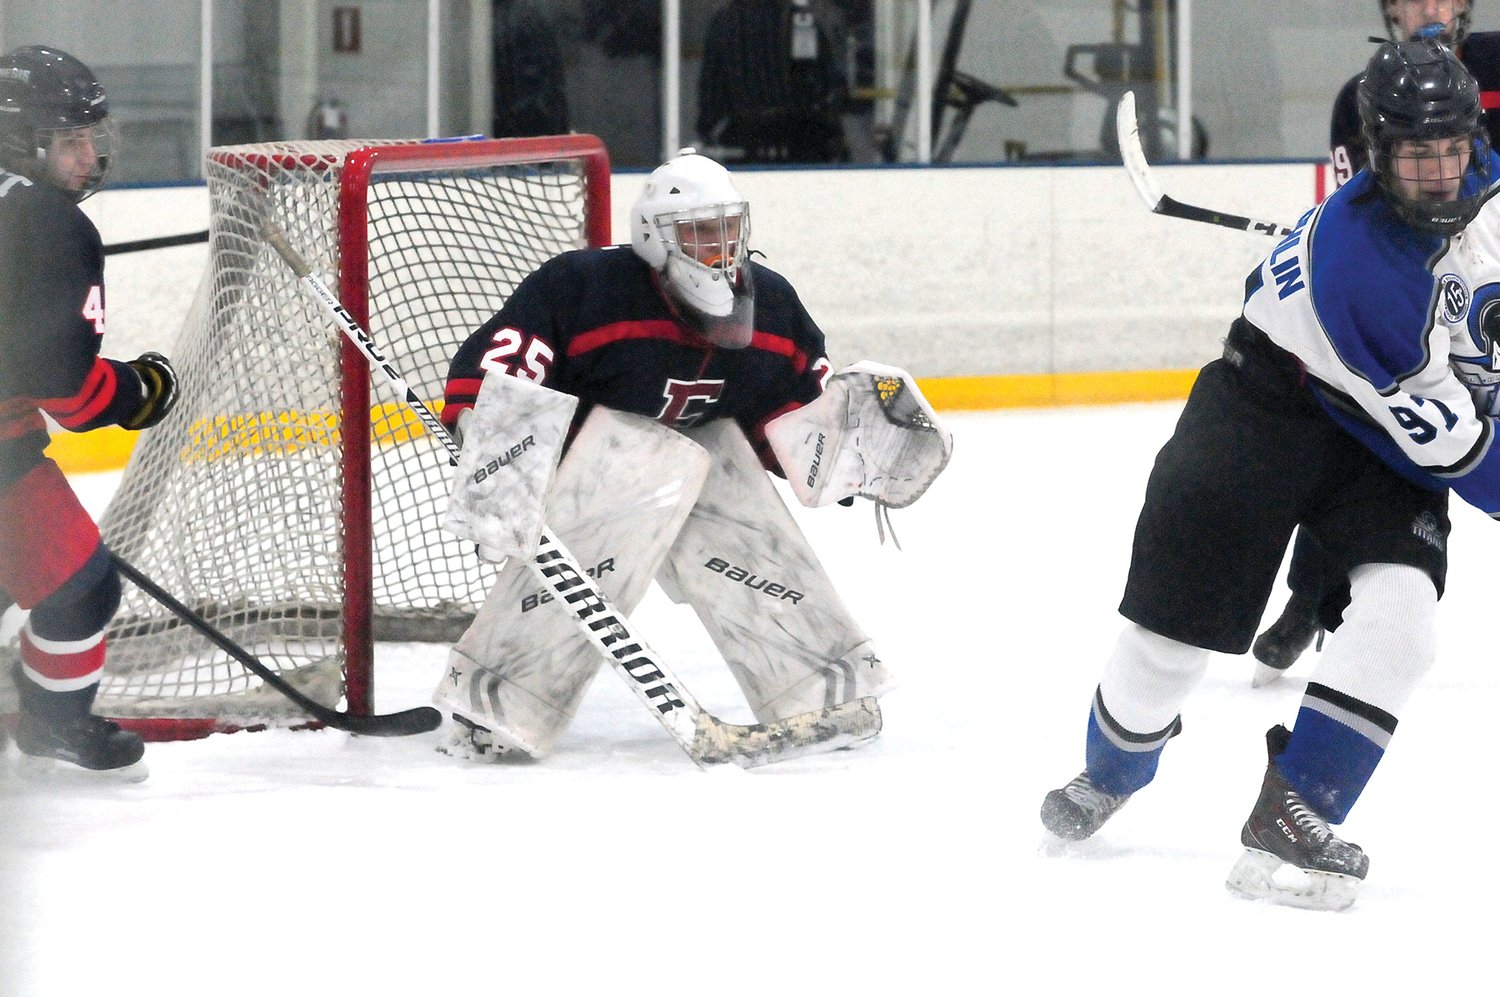 CB South forward Harry McLaughlin, 97, right, works the puck across ice as CB East goalkeeper Chris McIntyre stands tall between the pipes in the Titans’ win over the Patriots Jan. 8. Photograph by Steve Sherman.